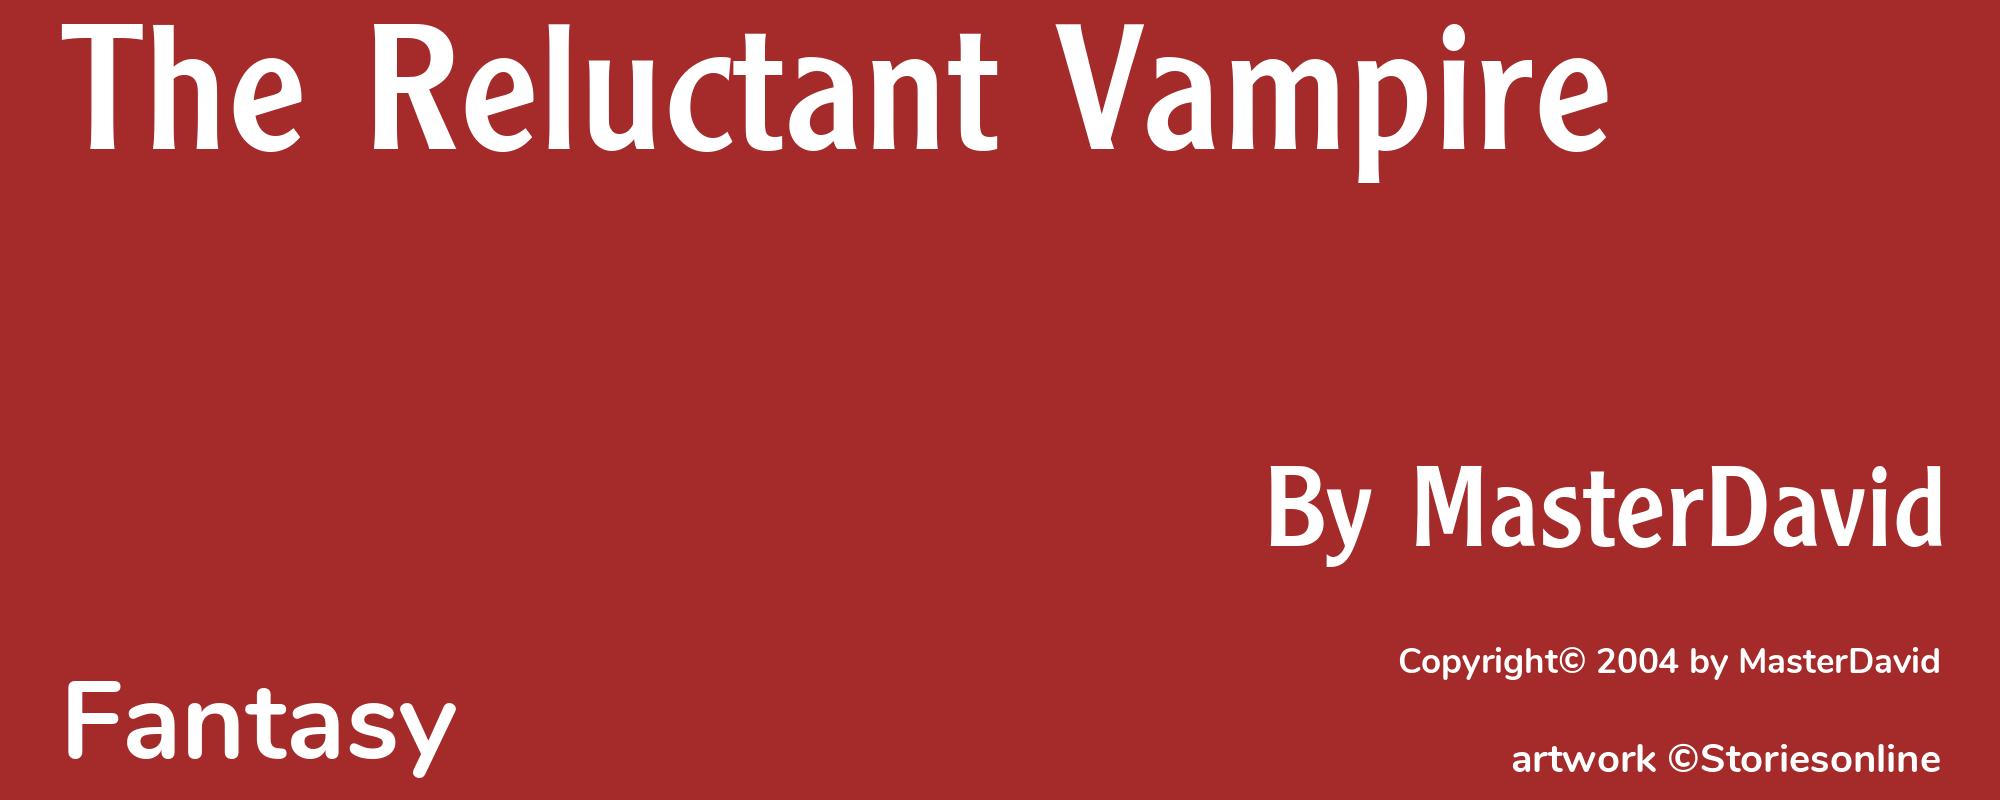 The Reluctant Vampire - Cover